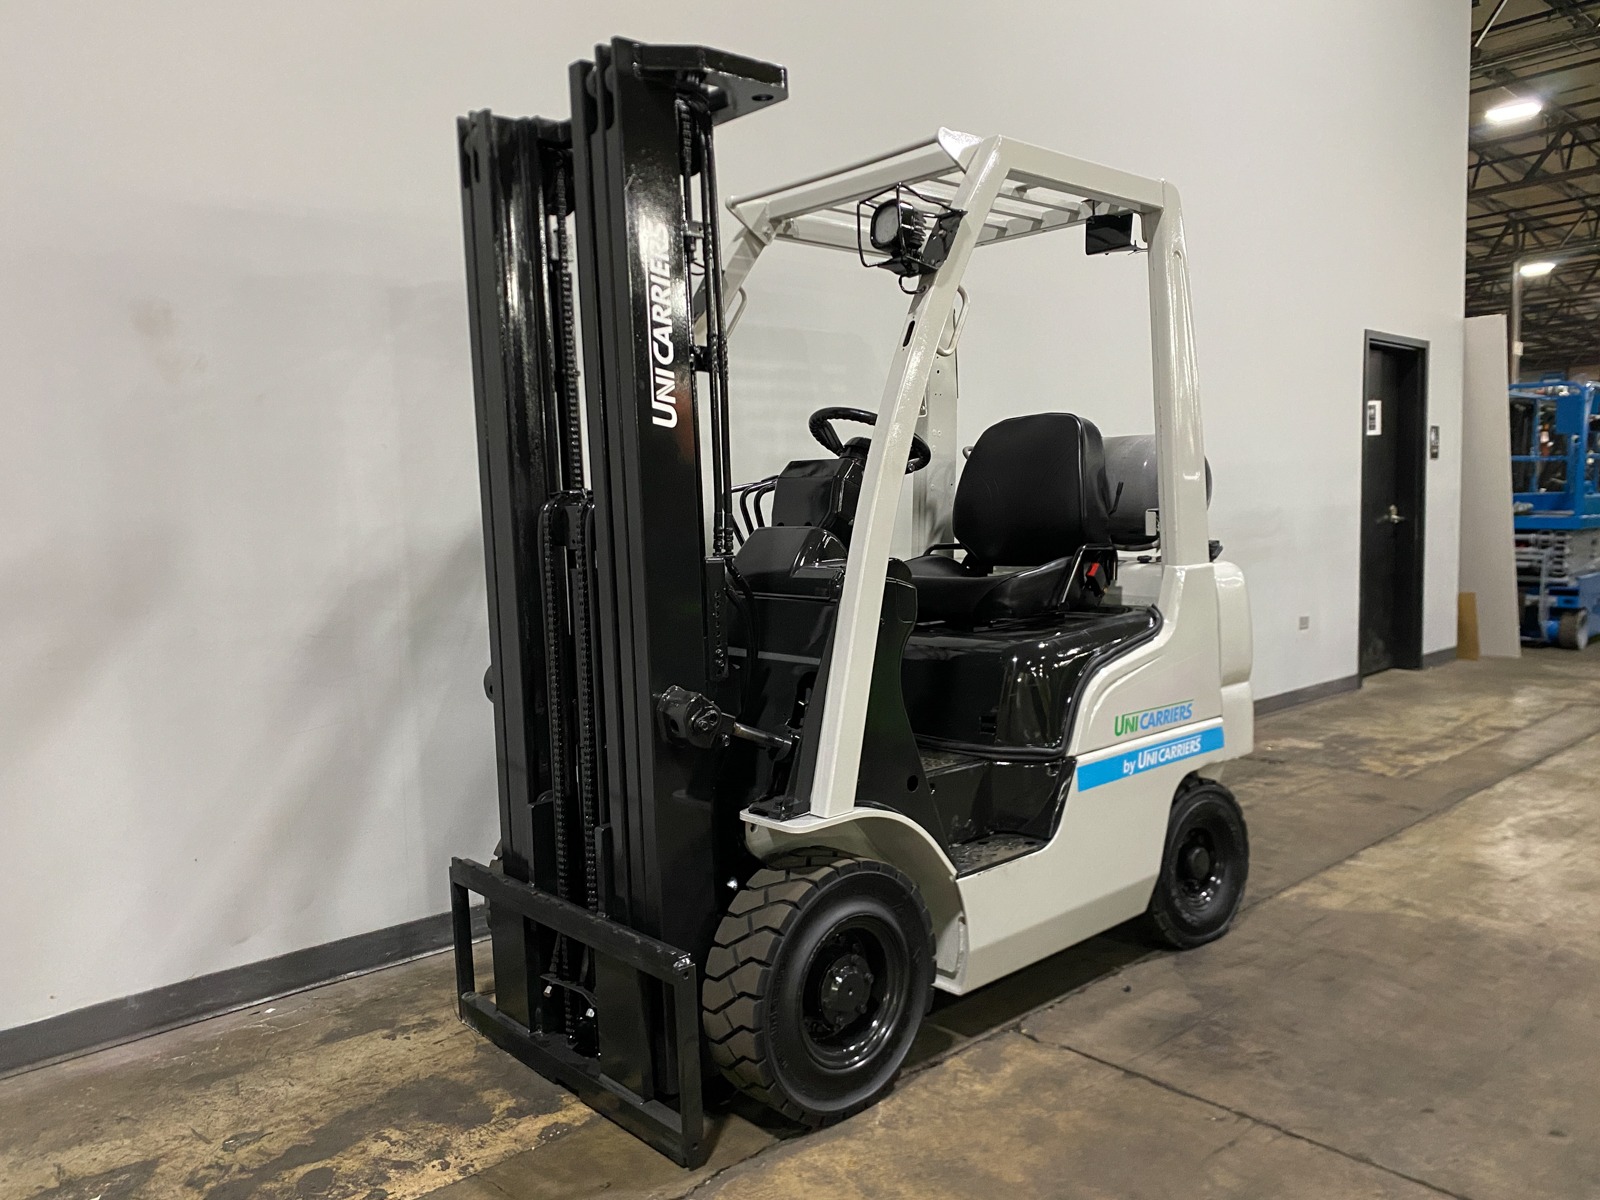 2017 UNICARRIERS MP1F1A18LV - 123Forklift